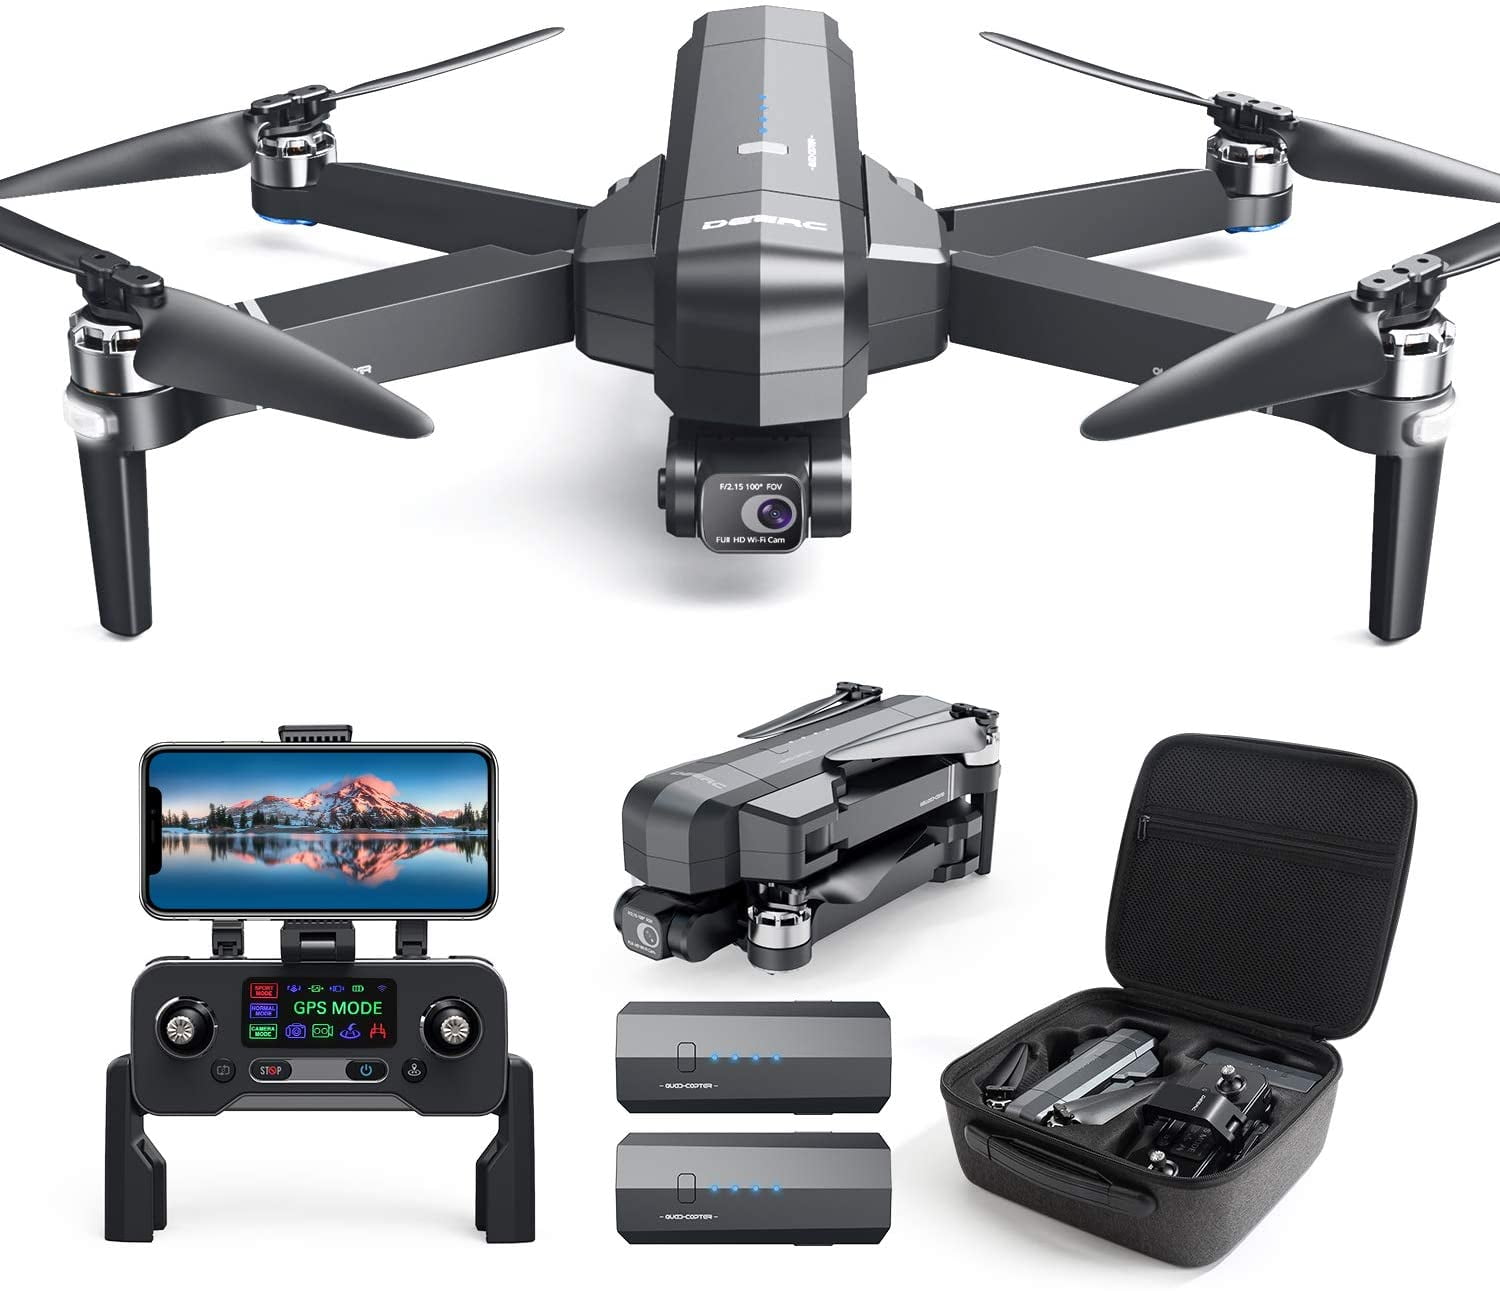 OPEN BOX Holy Stone HS720 Foldable GPS Drone Quadcopter with 4K UHD Camera 